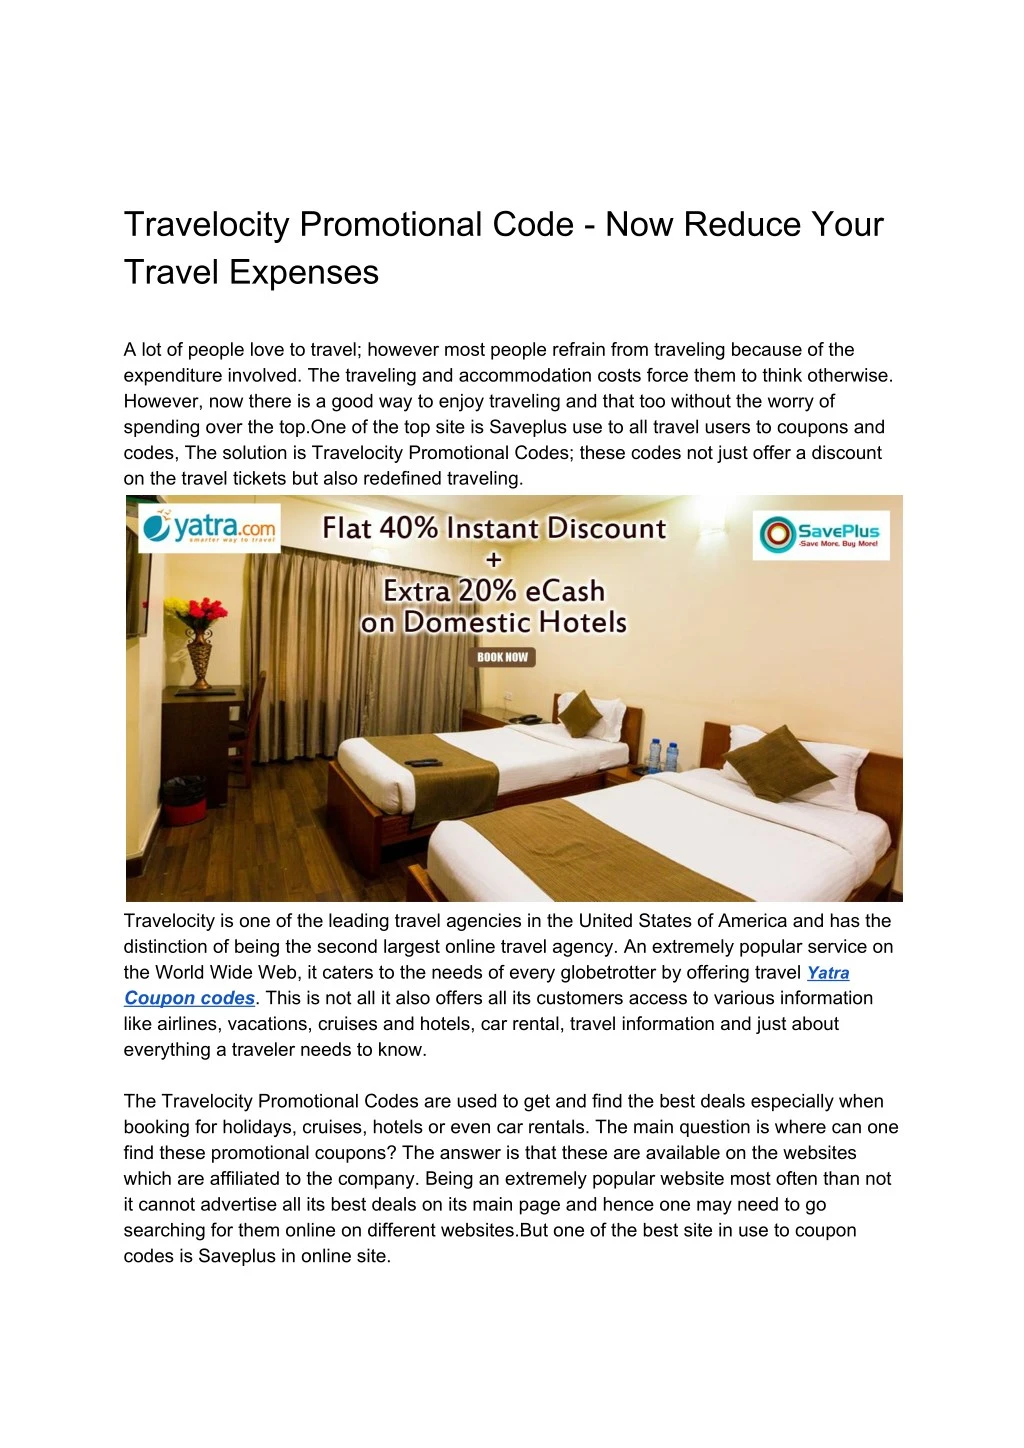 travelocity promotional code now reduce your